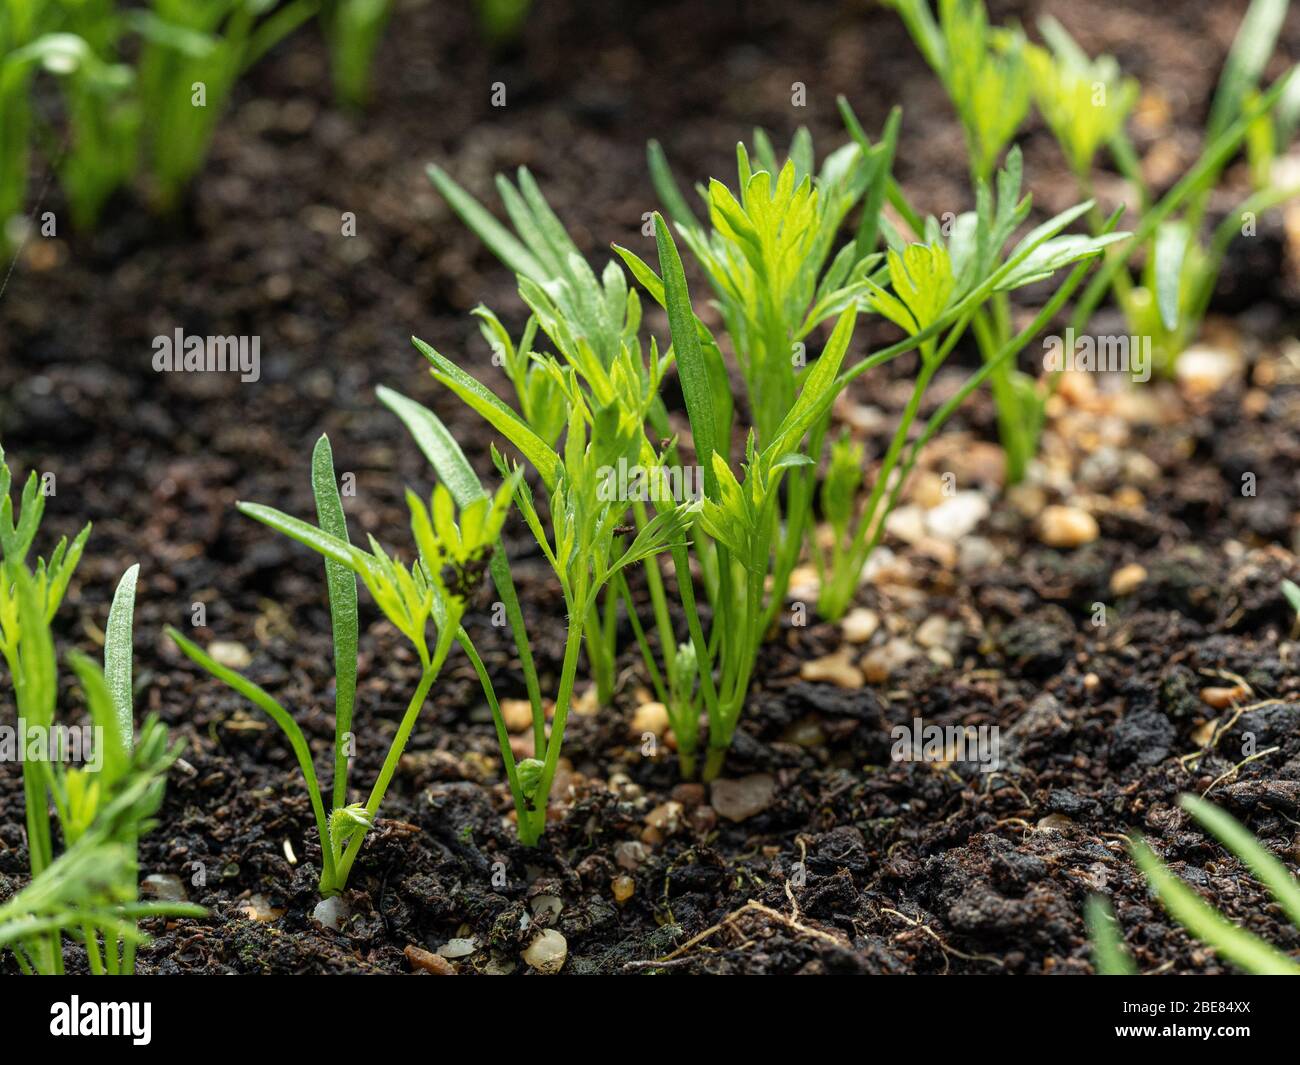 A close up of part of a row of young carrot seedlings that have just developed their first true leaves Stock Photo